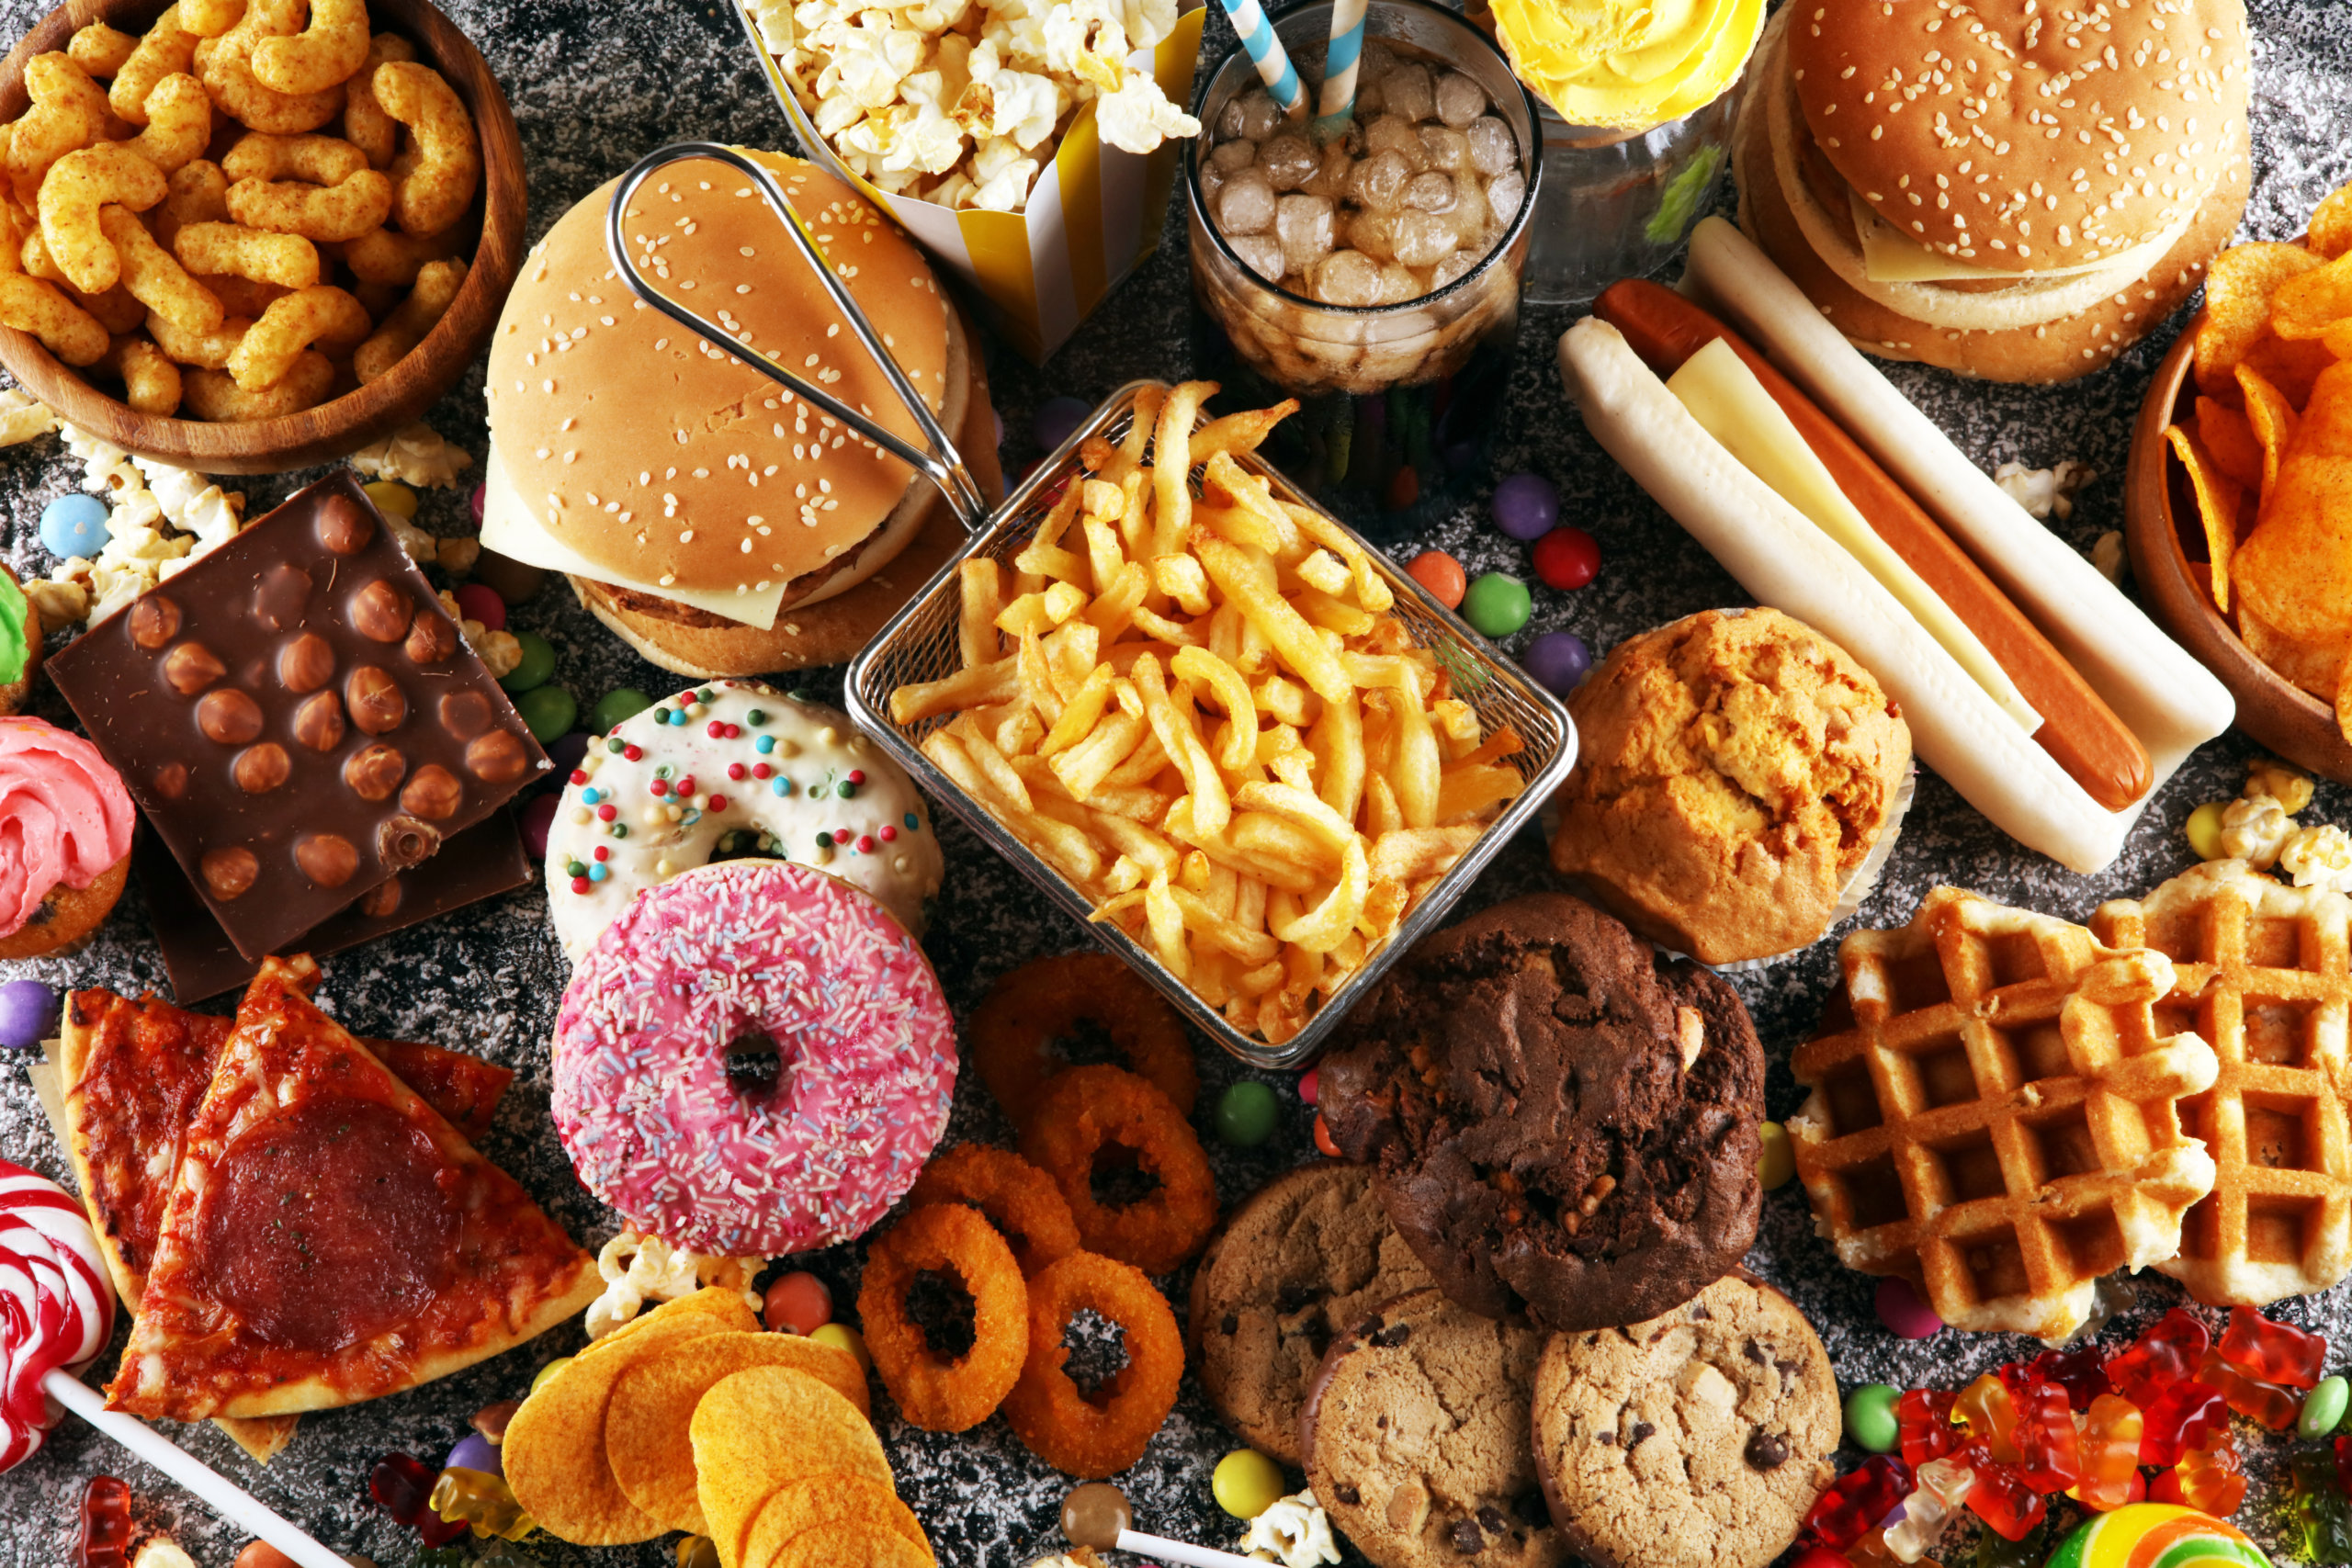 Eating Highly Processed Foods May Raise Cancer Risk